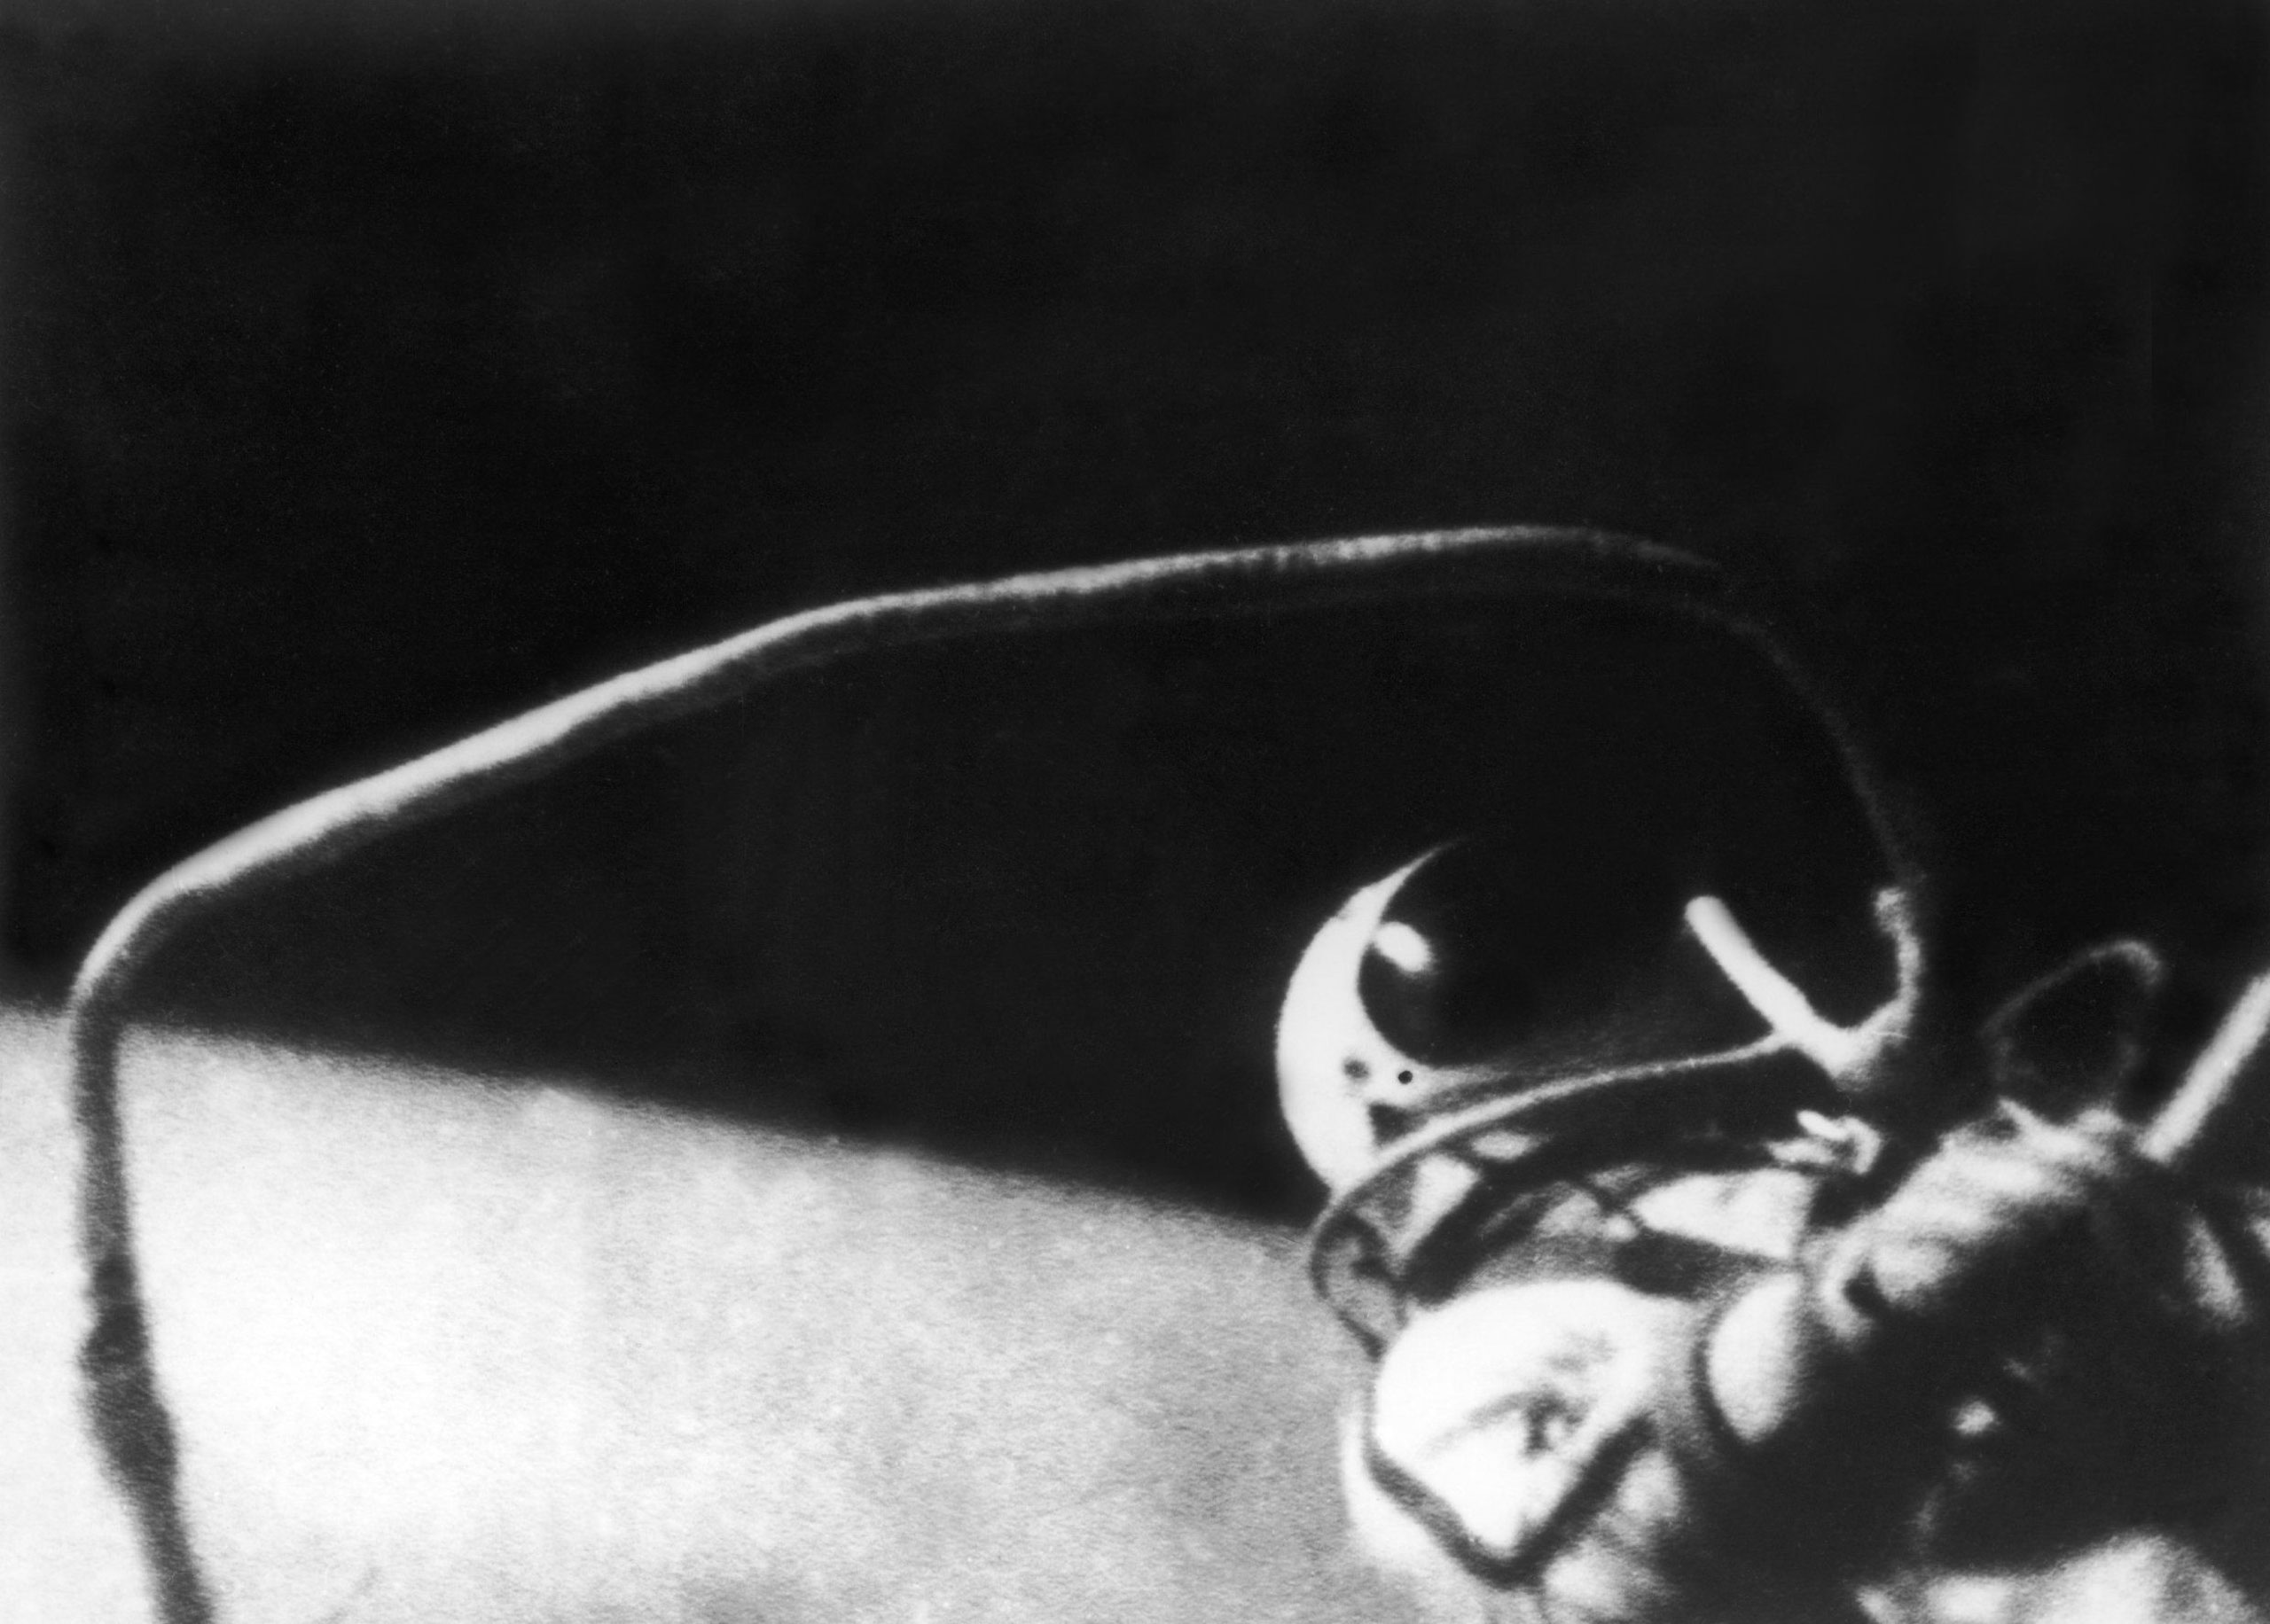 The astonaut Alexei Leonov floating in space during his first spacewalk on March 18, 1965. (Keystone-France/Gamma-Keystone/Getty Images)